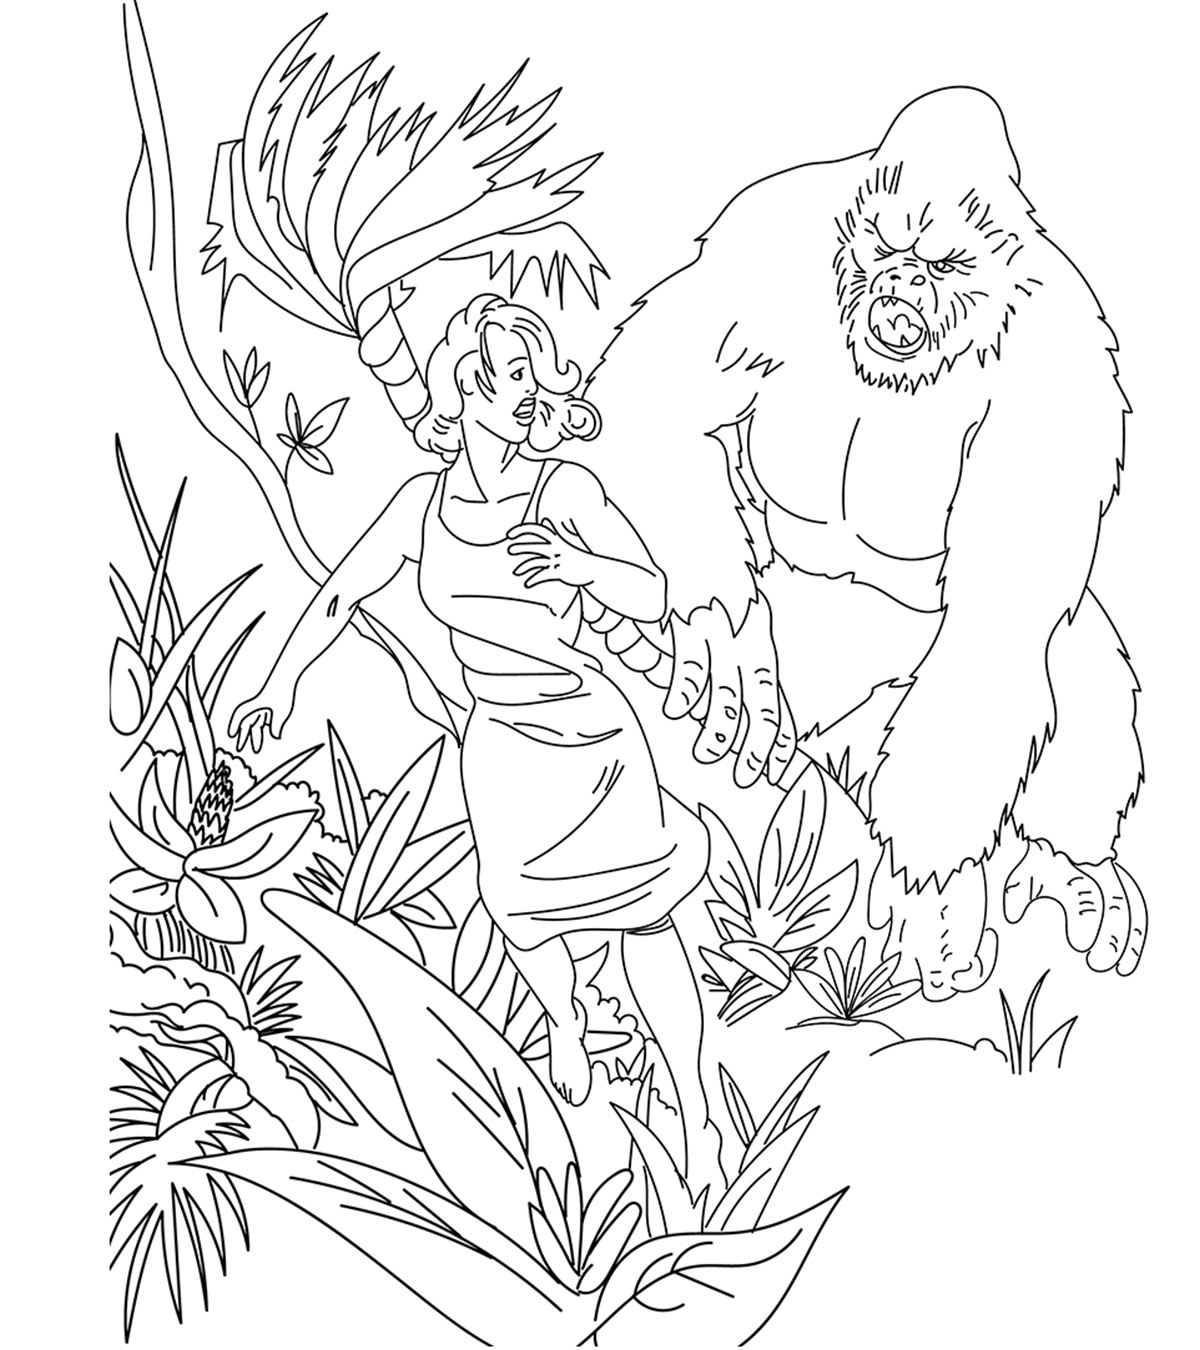 Top 10 King Kong Coloring Pages For Toddlers_image